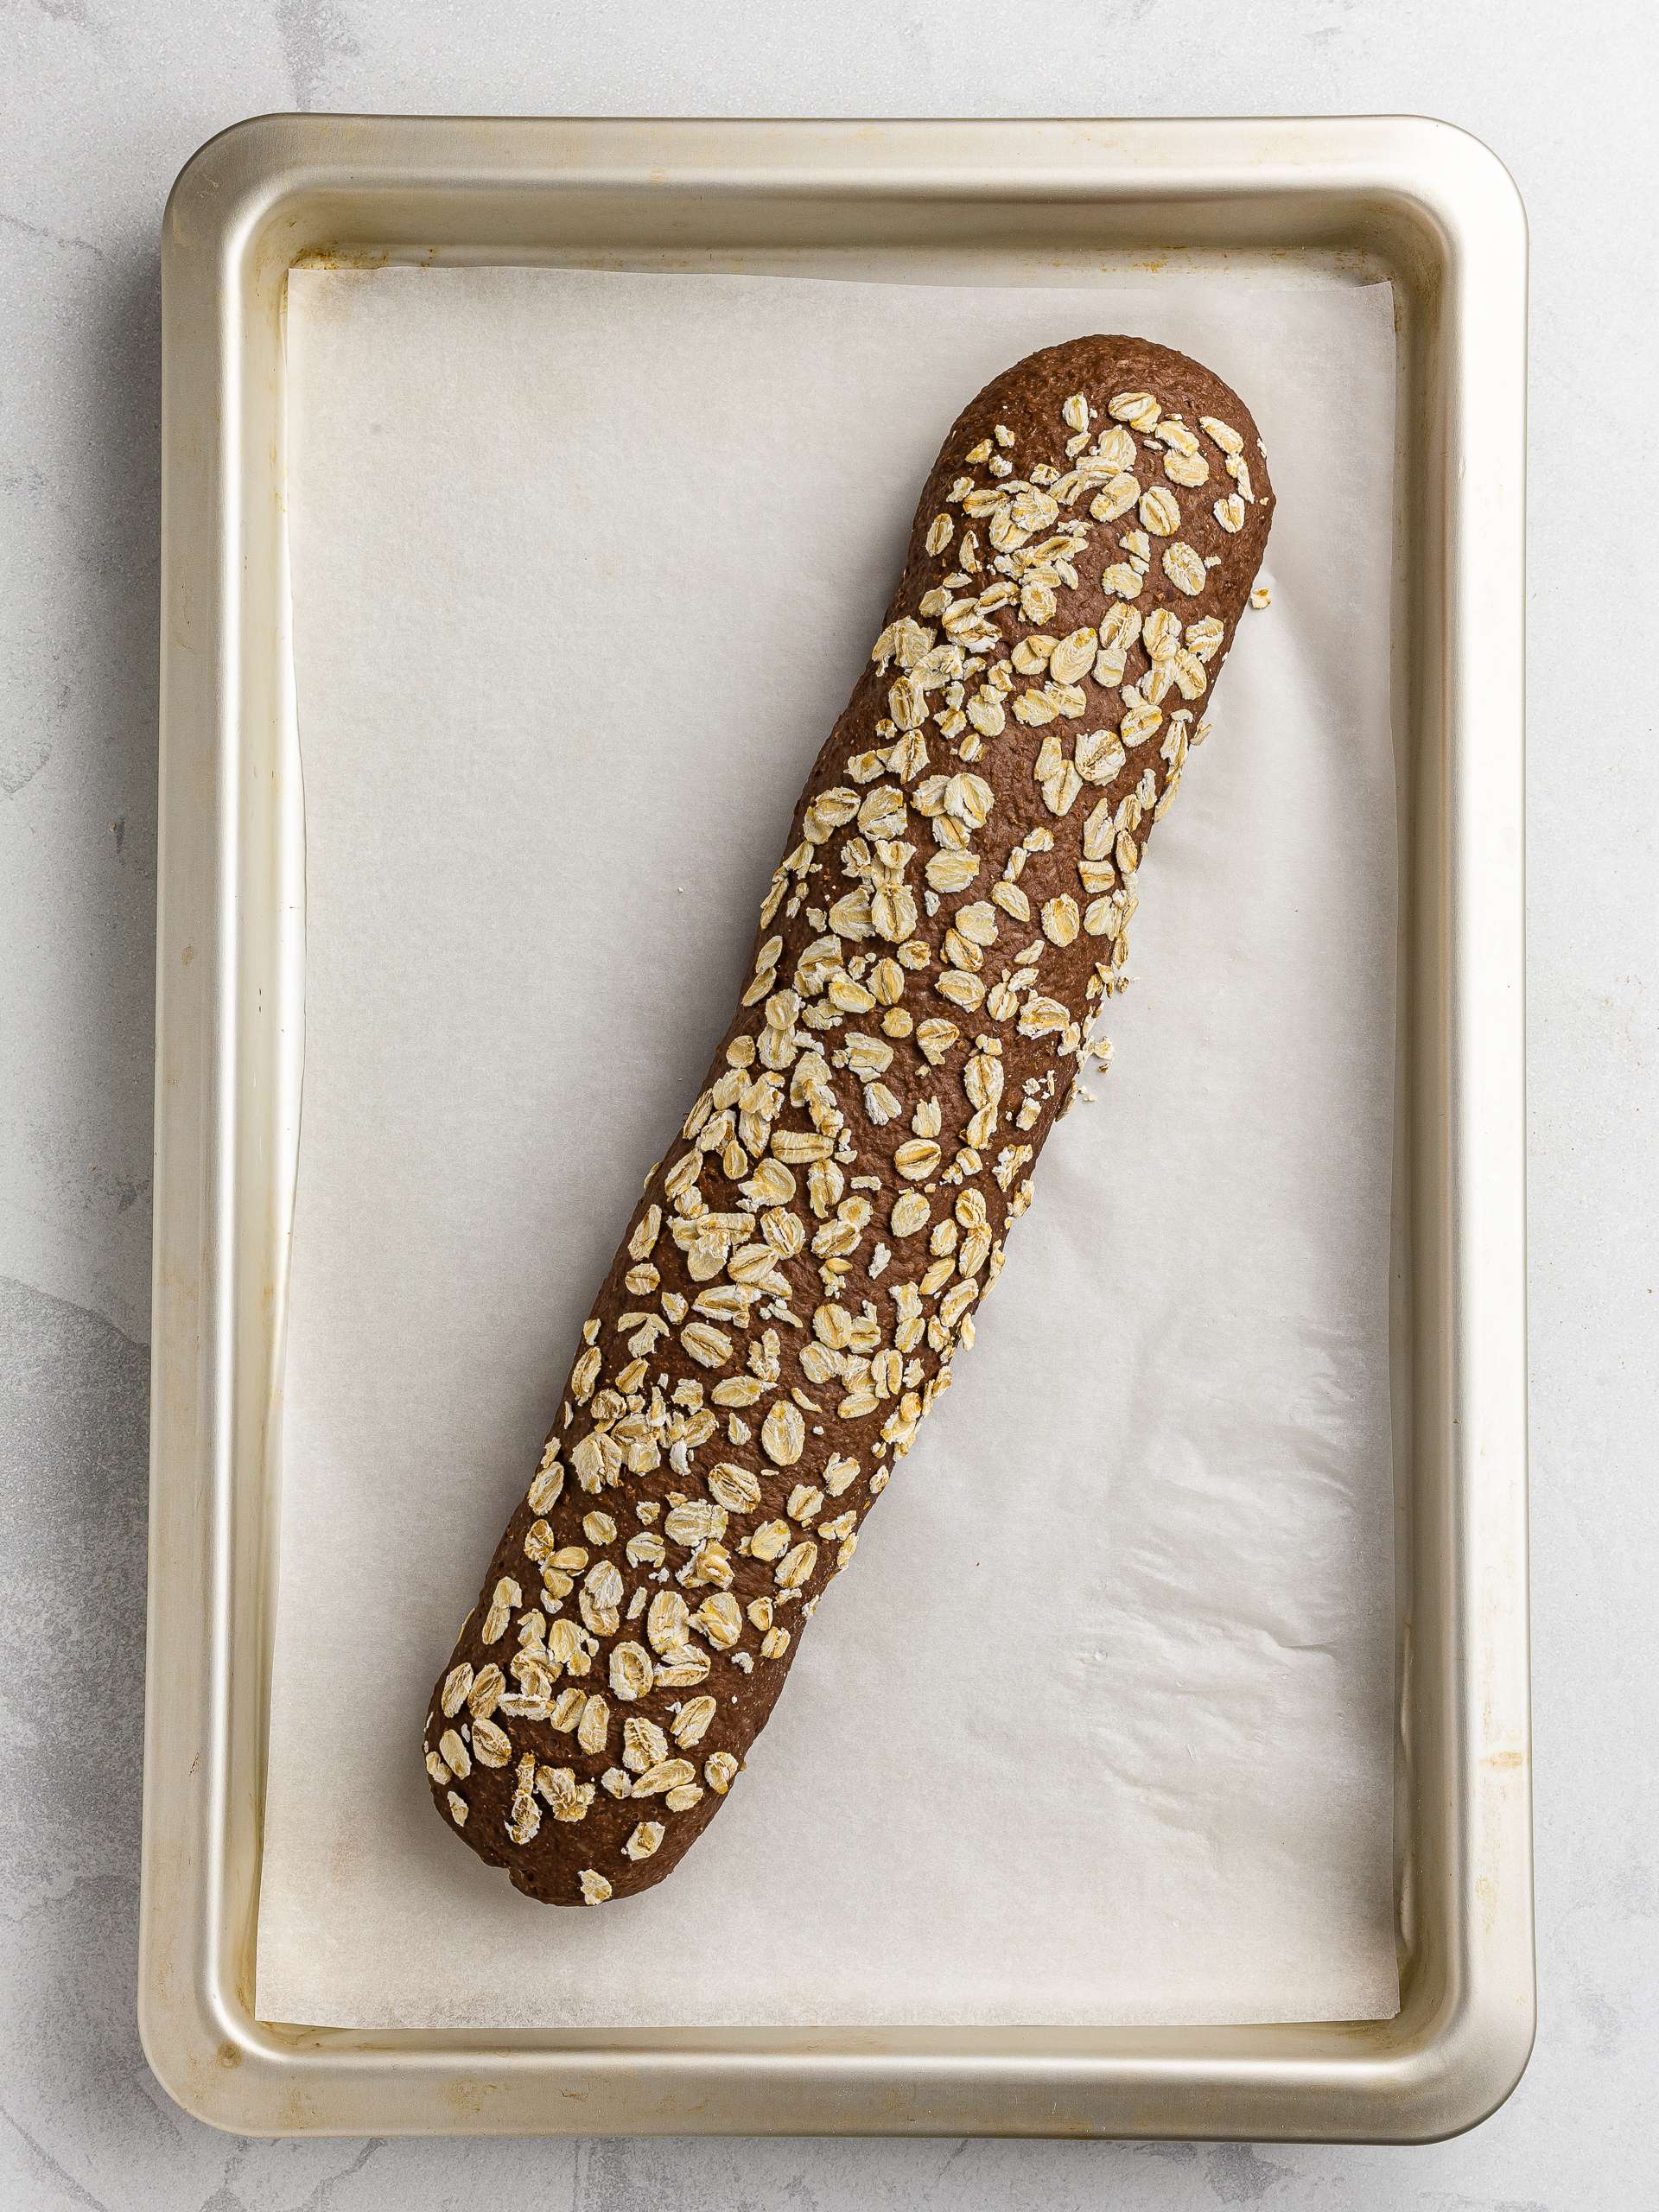 proved brown baguette with oats